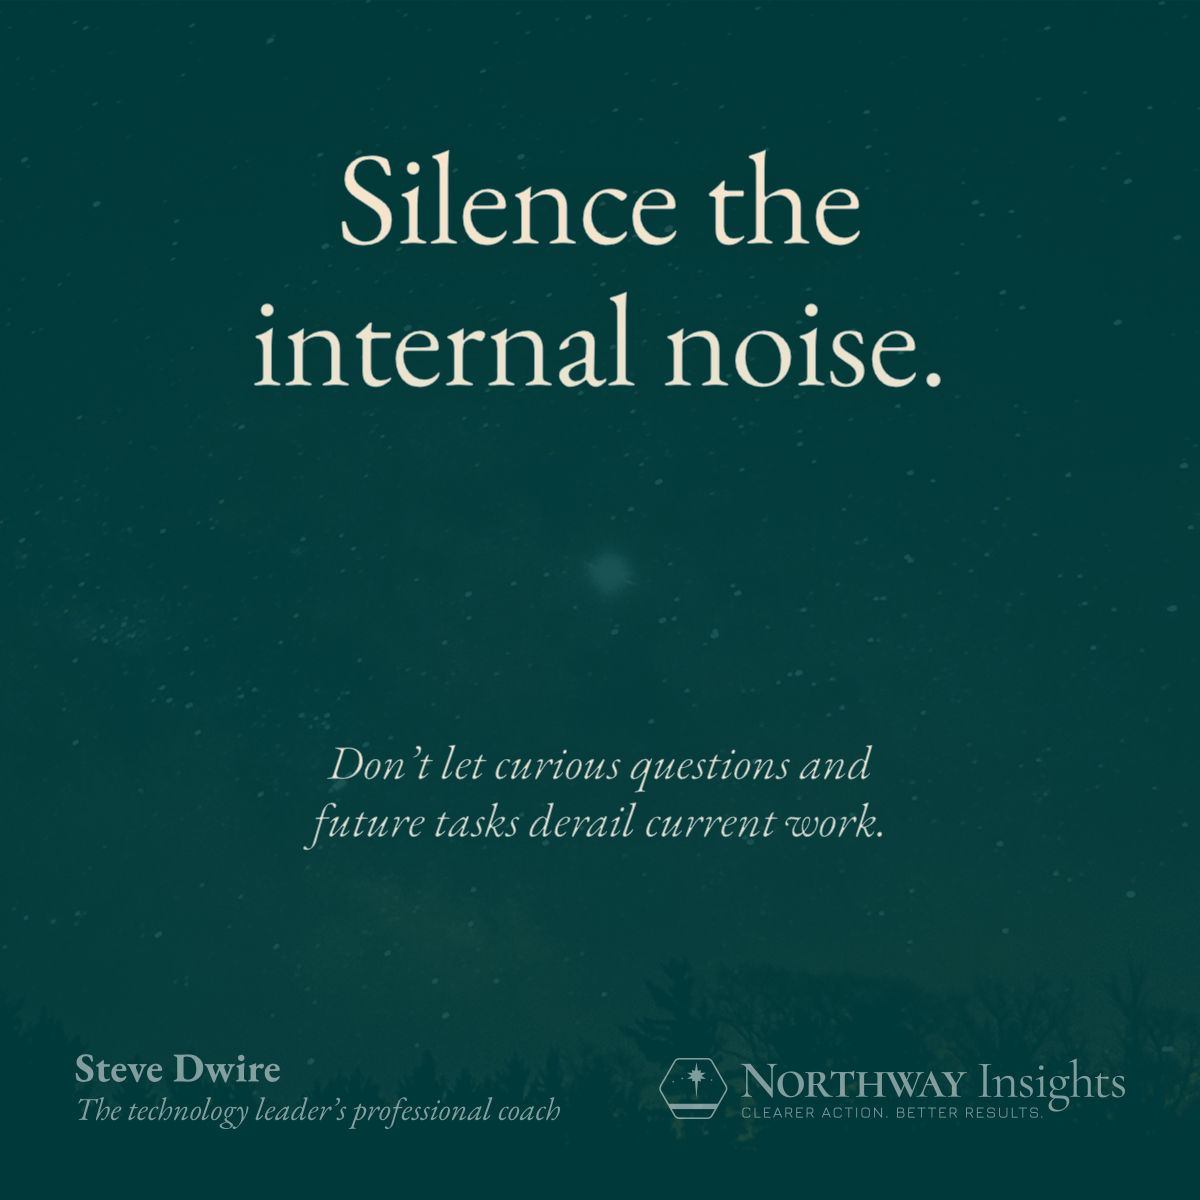 Silence the internal noise. (Don't let curious questions and future tasks derail current work.)